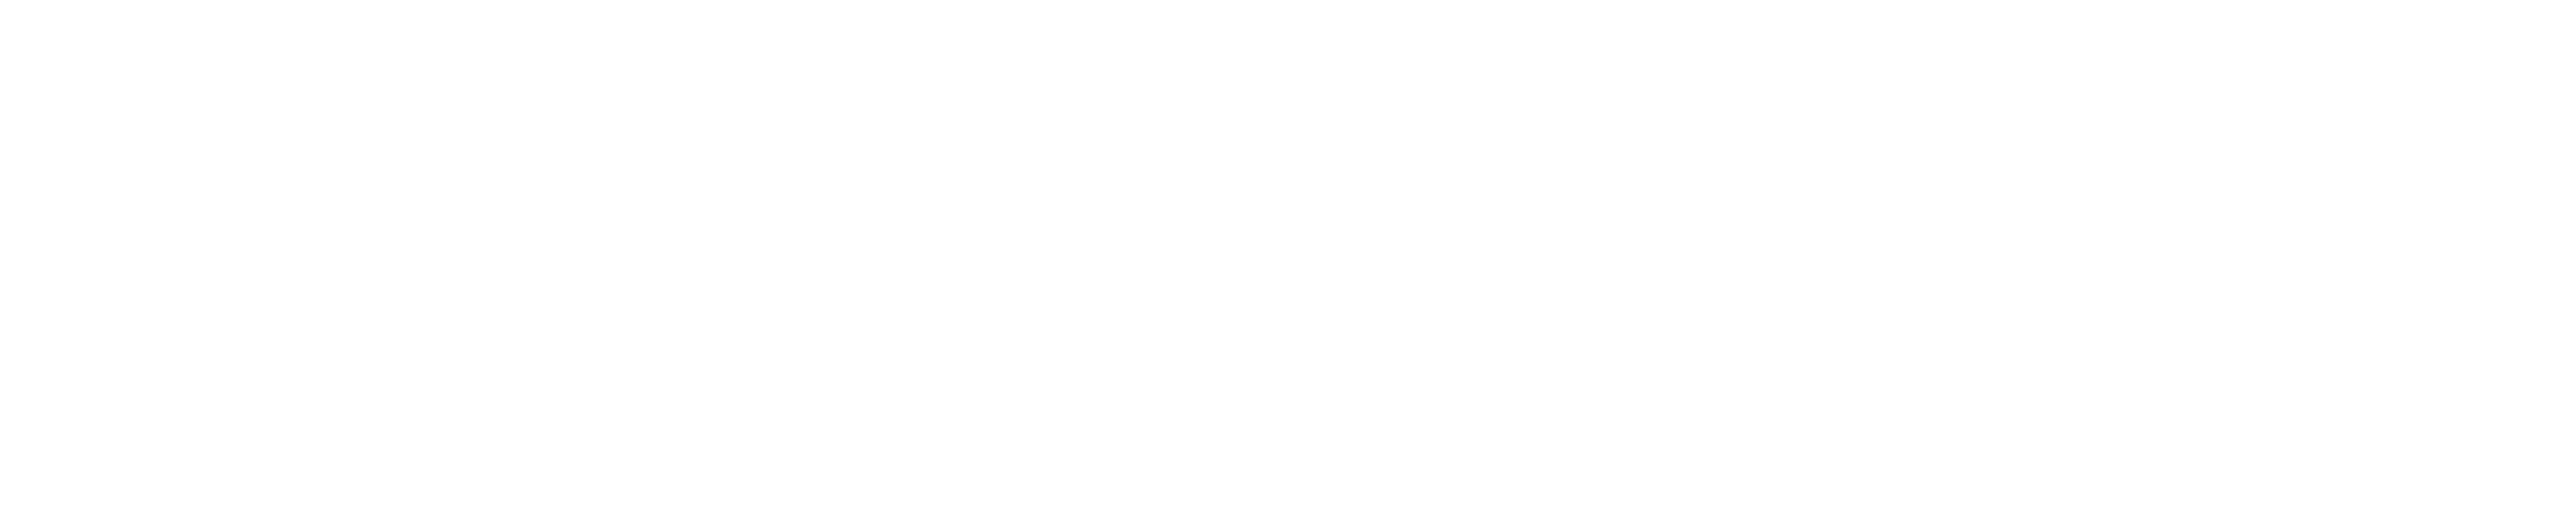 United States Olympic & Paralympic Committee logo with a flag and rings, plus a flag and agitos.